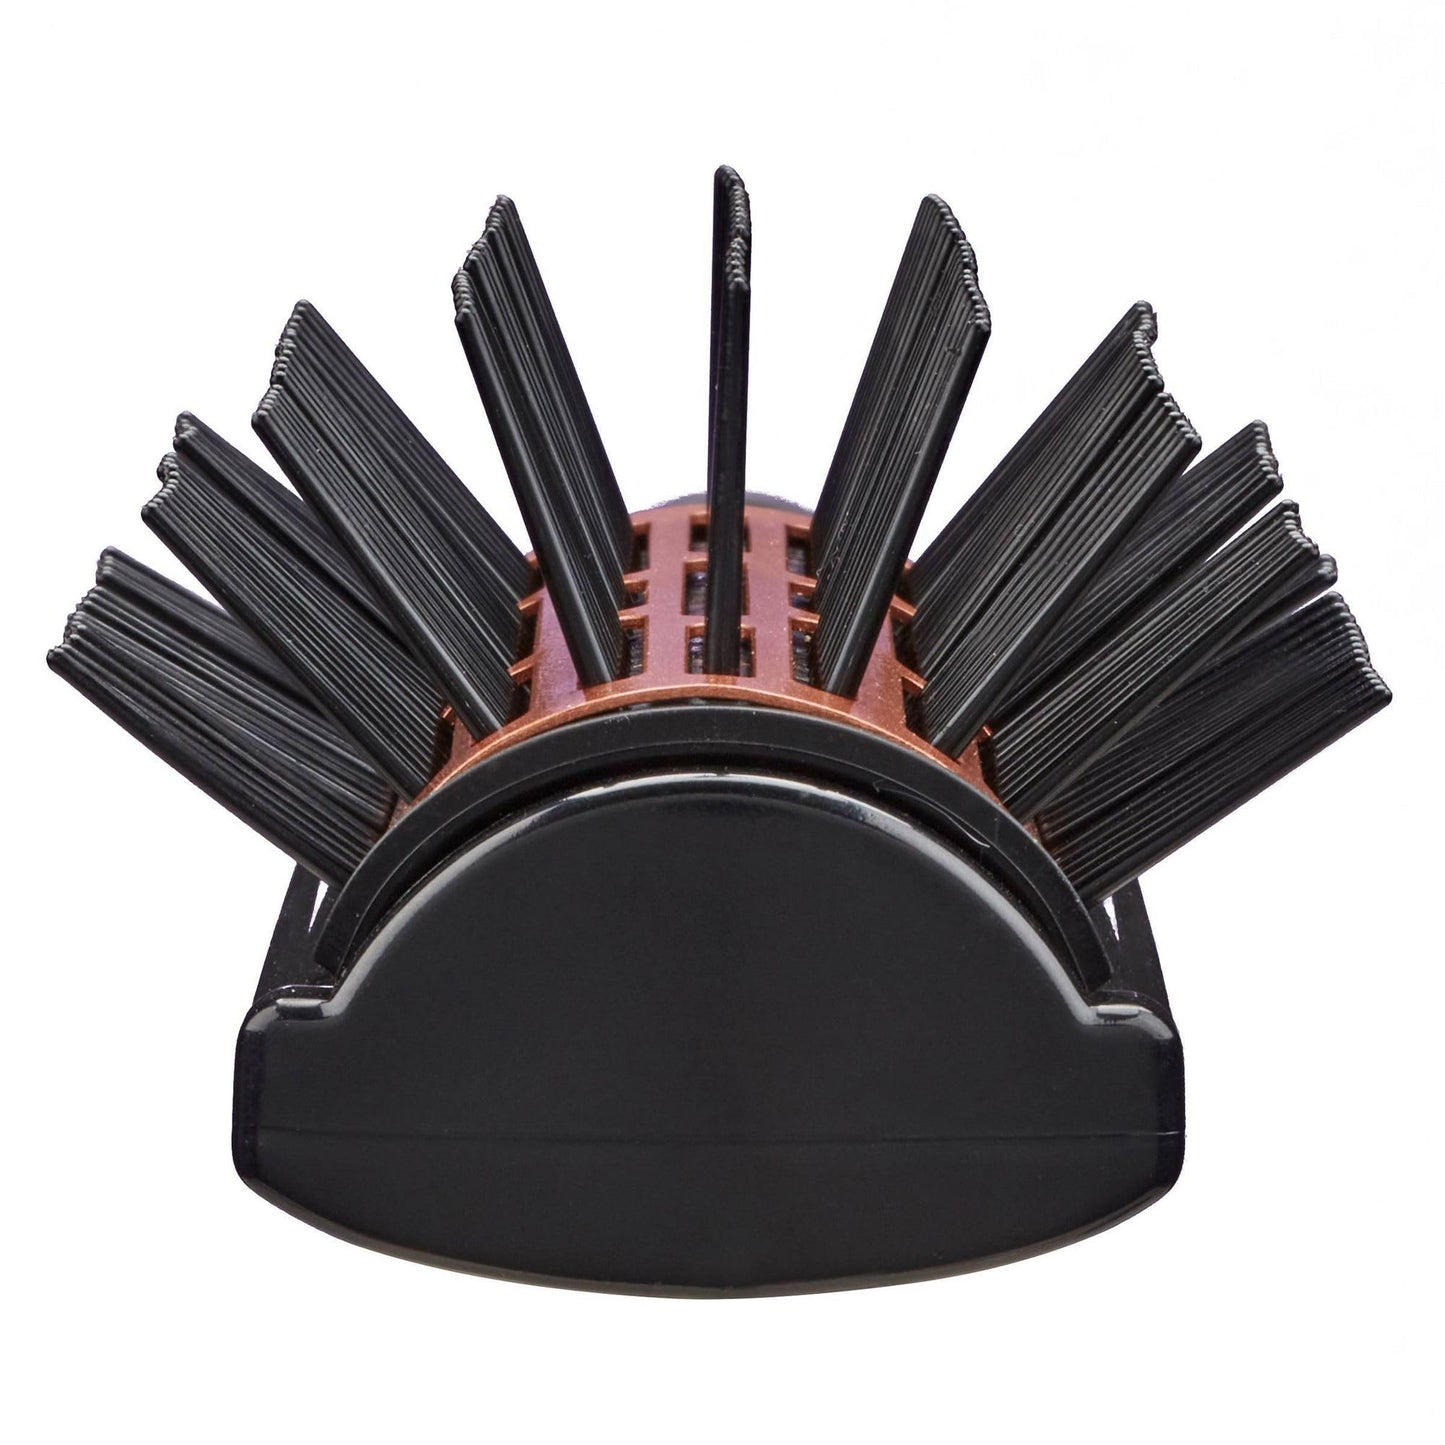 Conair Quick Blow Dry Pro Copper Collection Hair Brush